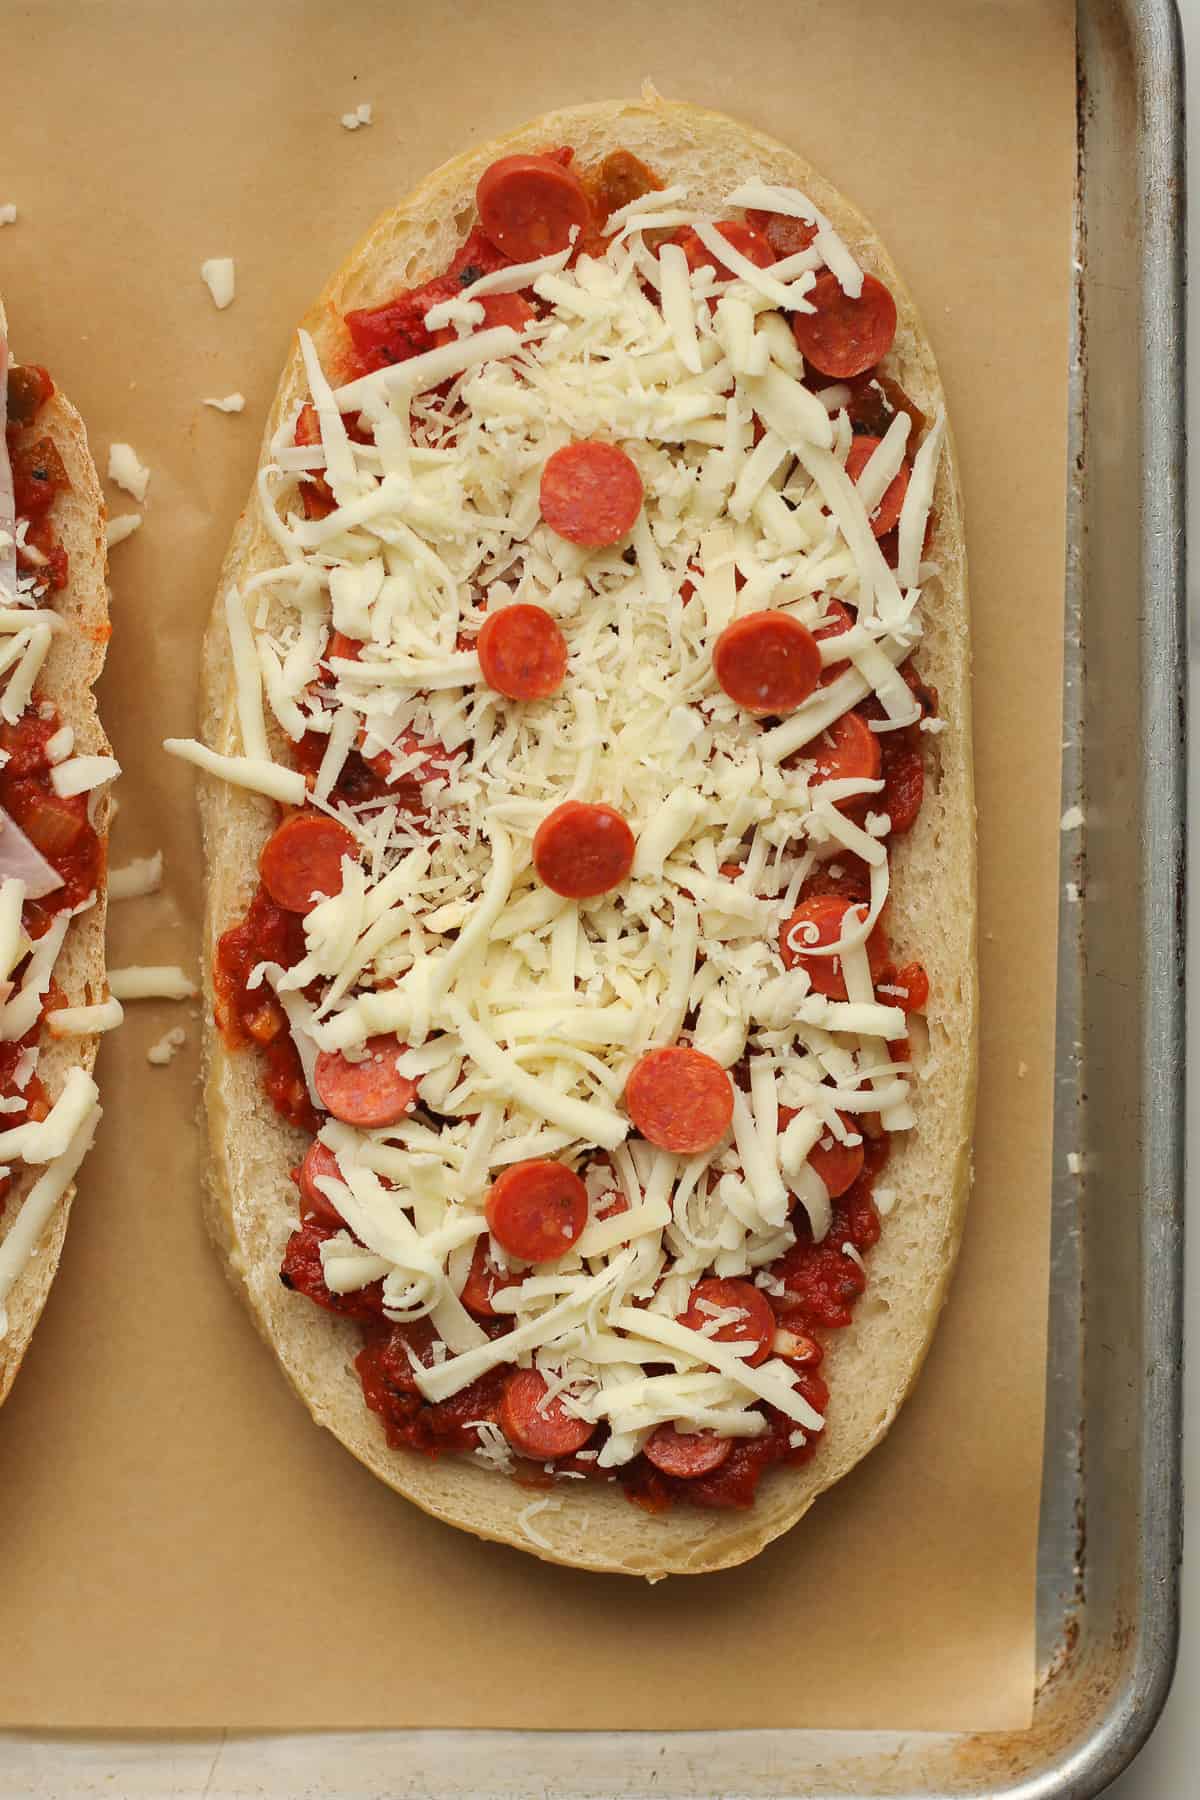 Pepperoni French bread pizza ready to bake.